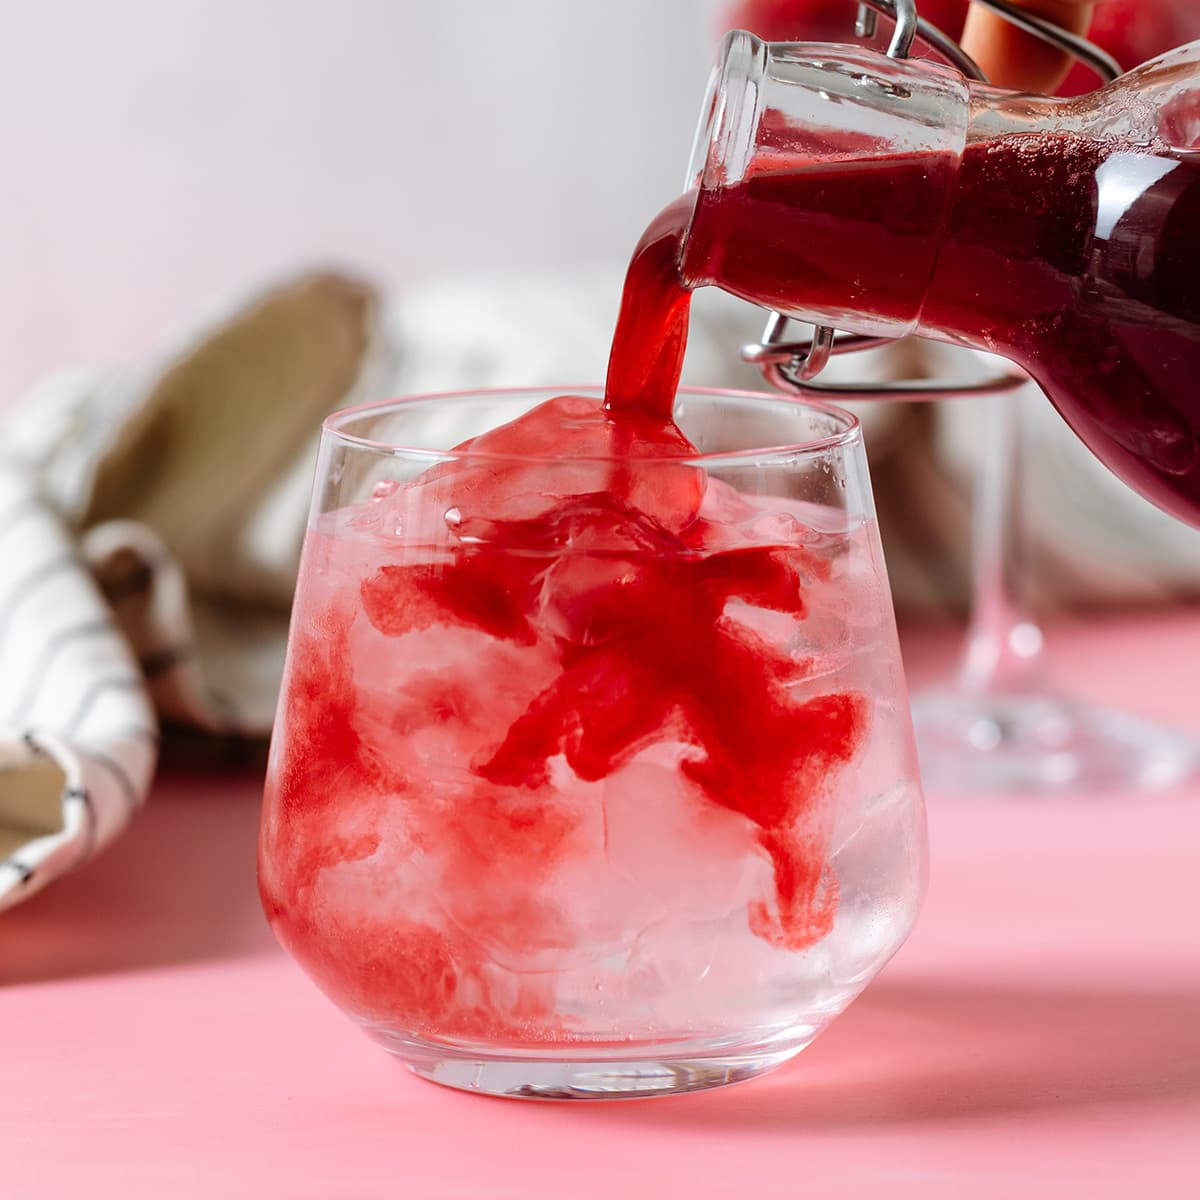 Raspberry syrup being poured into a glass of water on a pink background.